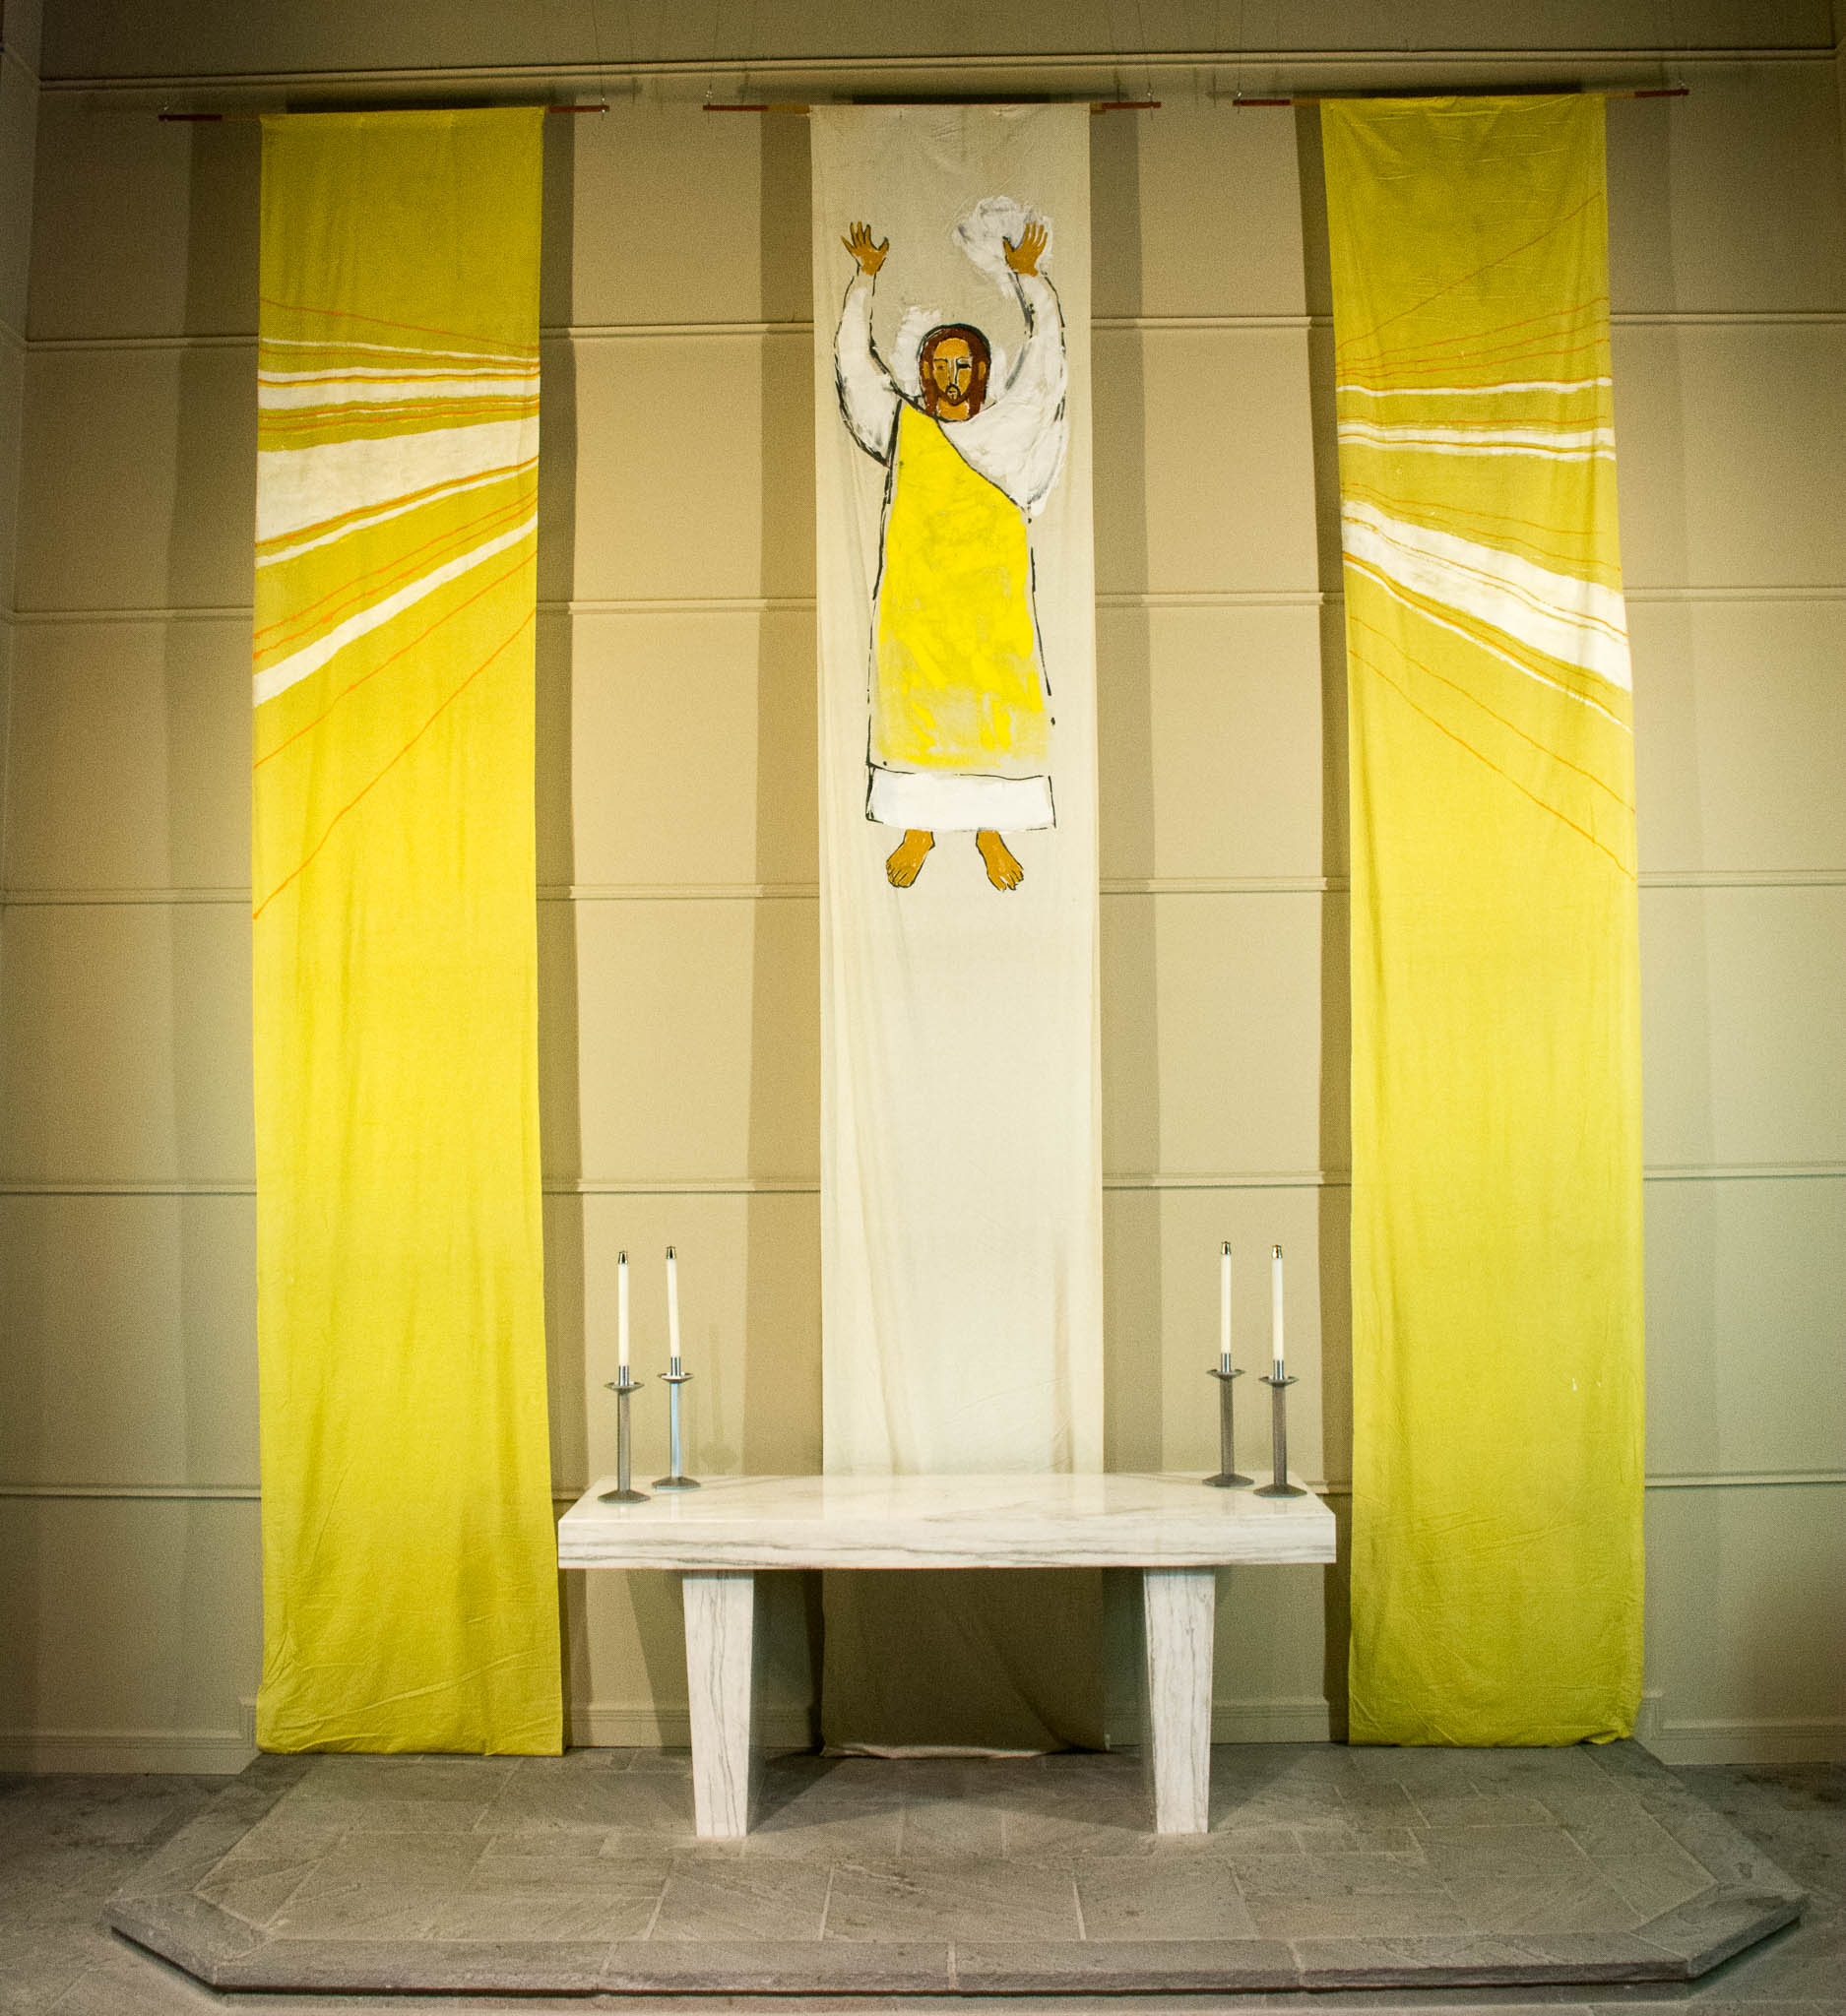 Three vertical banners hang behind the altar. In the middle, Jesus reaches into the air. Bright yellow panels with white rays of light hang on either side.